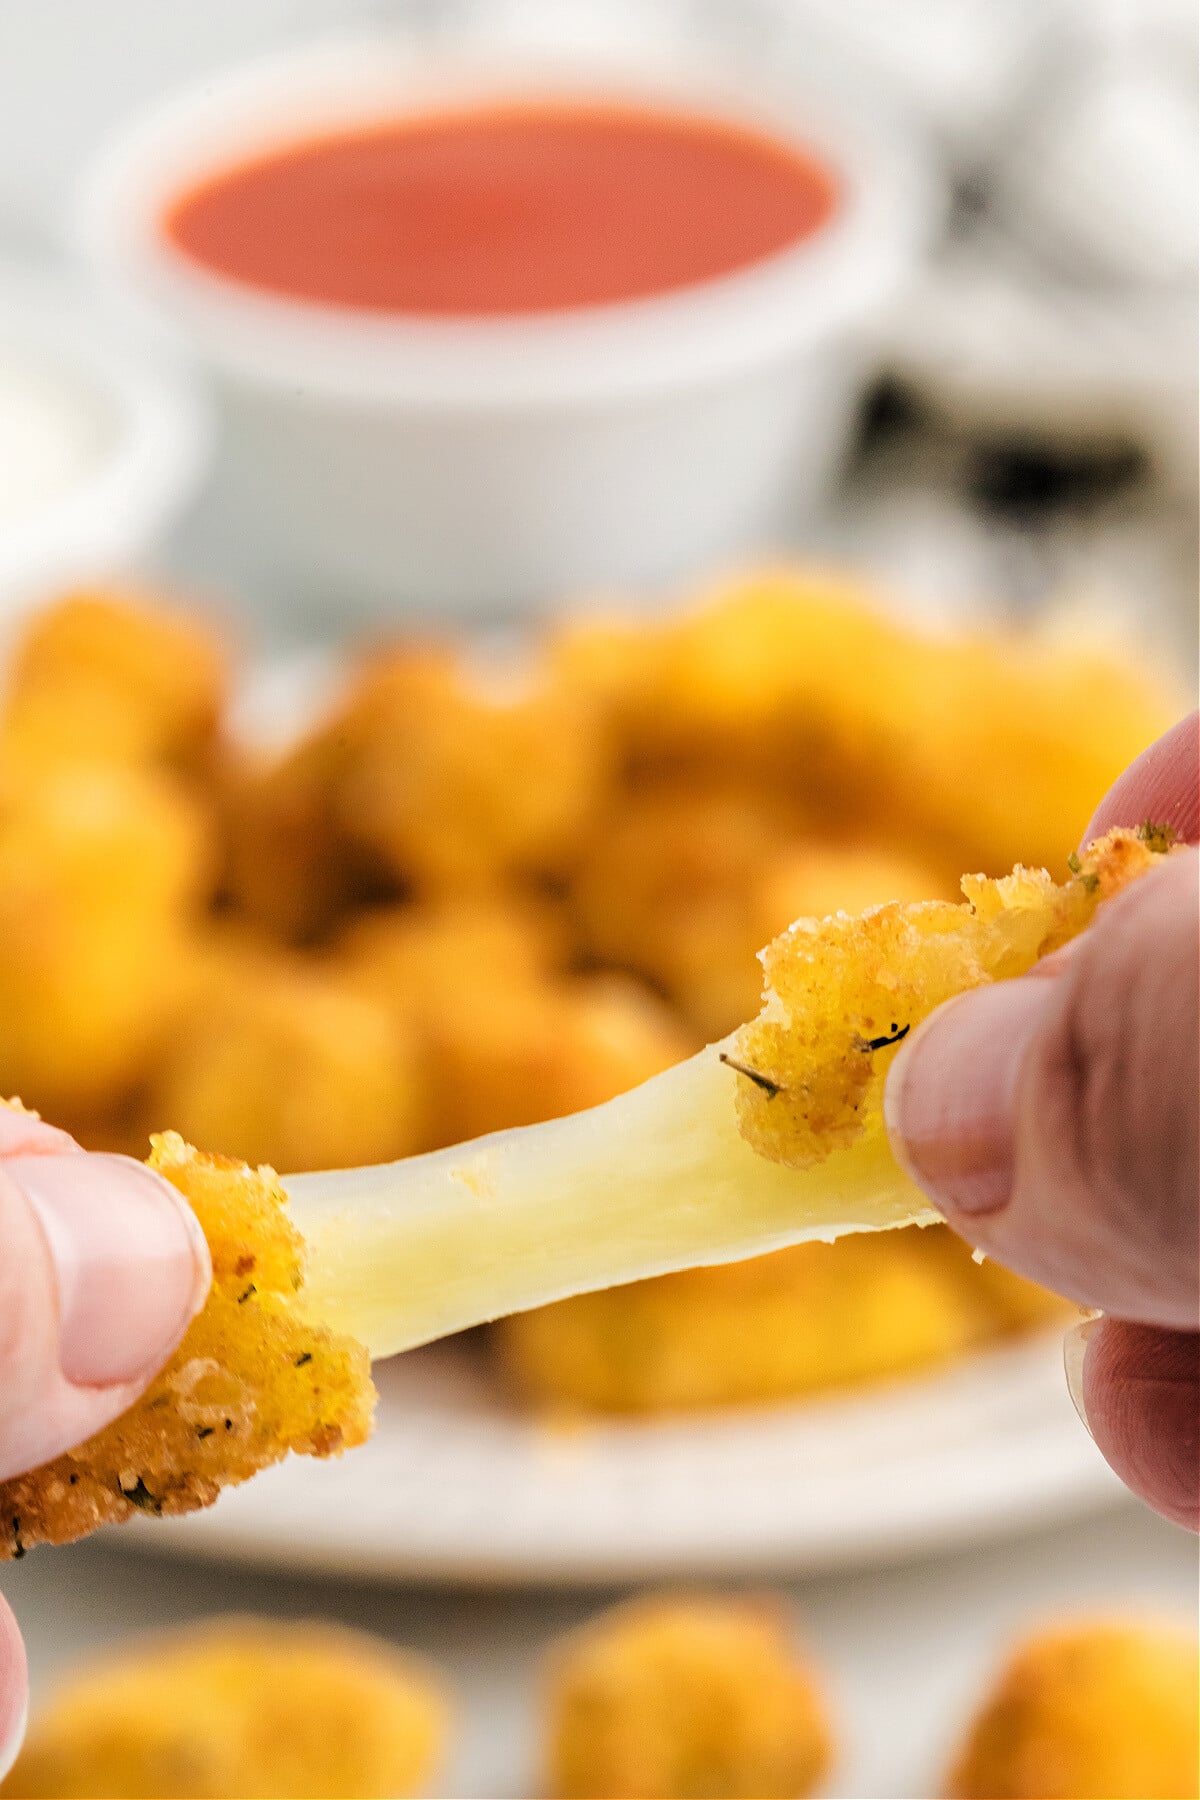 homemade cheese curds with cheese pulled